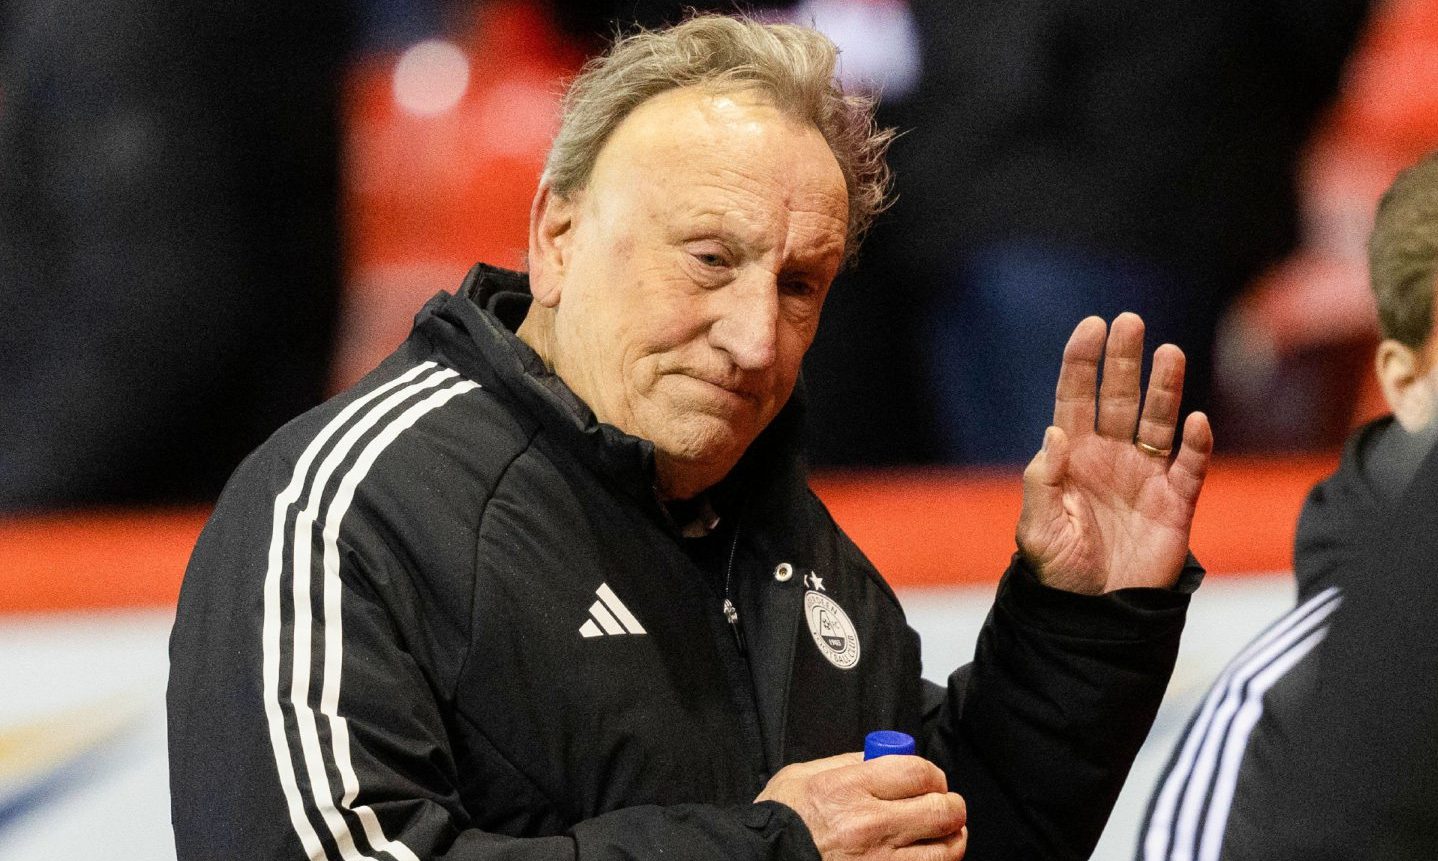 Aberdeen manager Neil Warnock after Wednesday night's 2-0 Premiership loss to St Johnstone. 